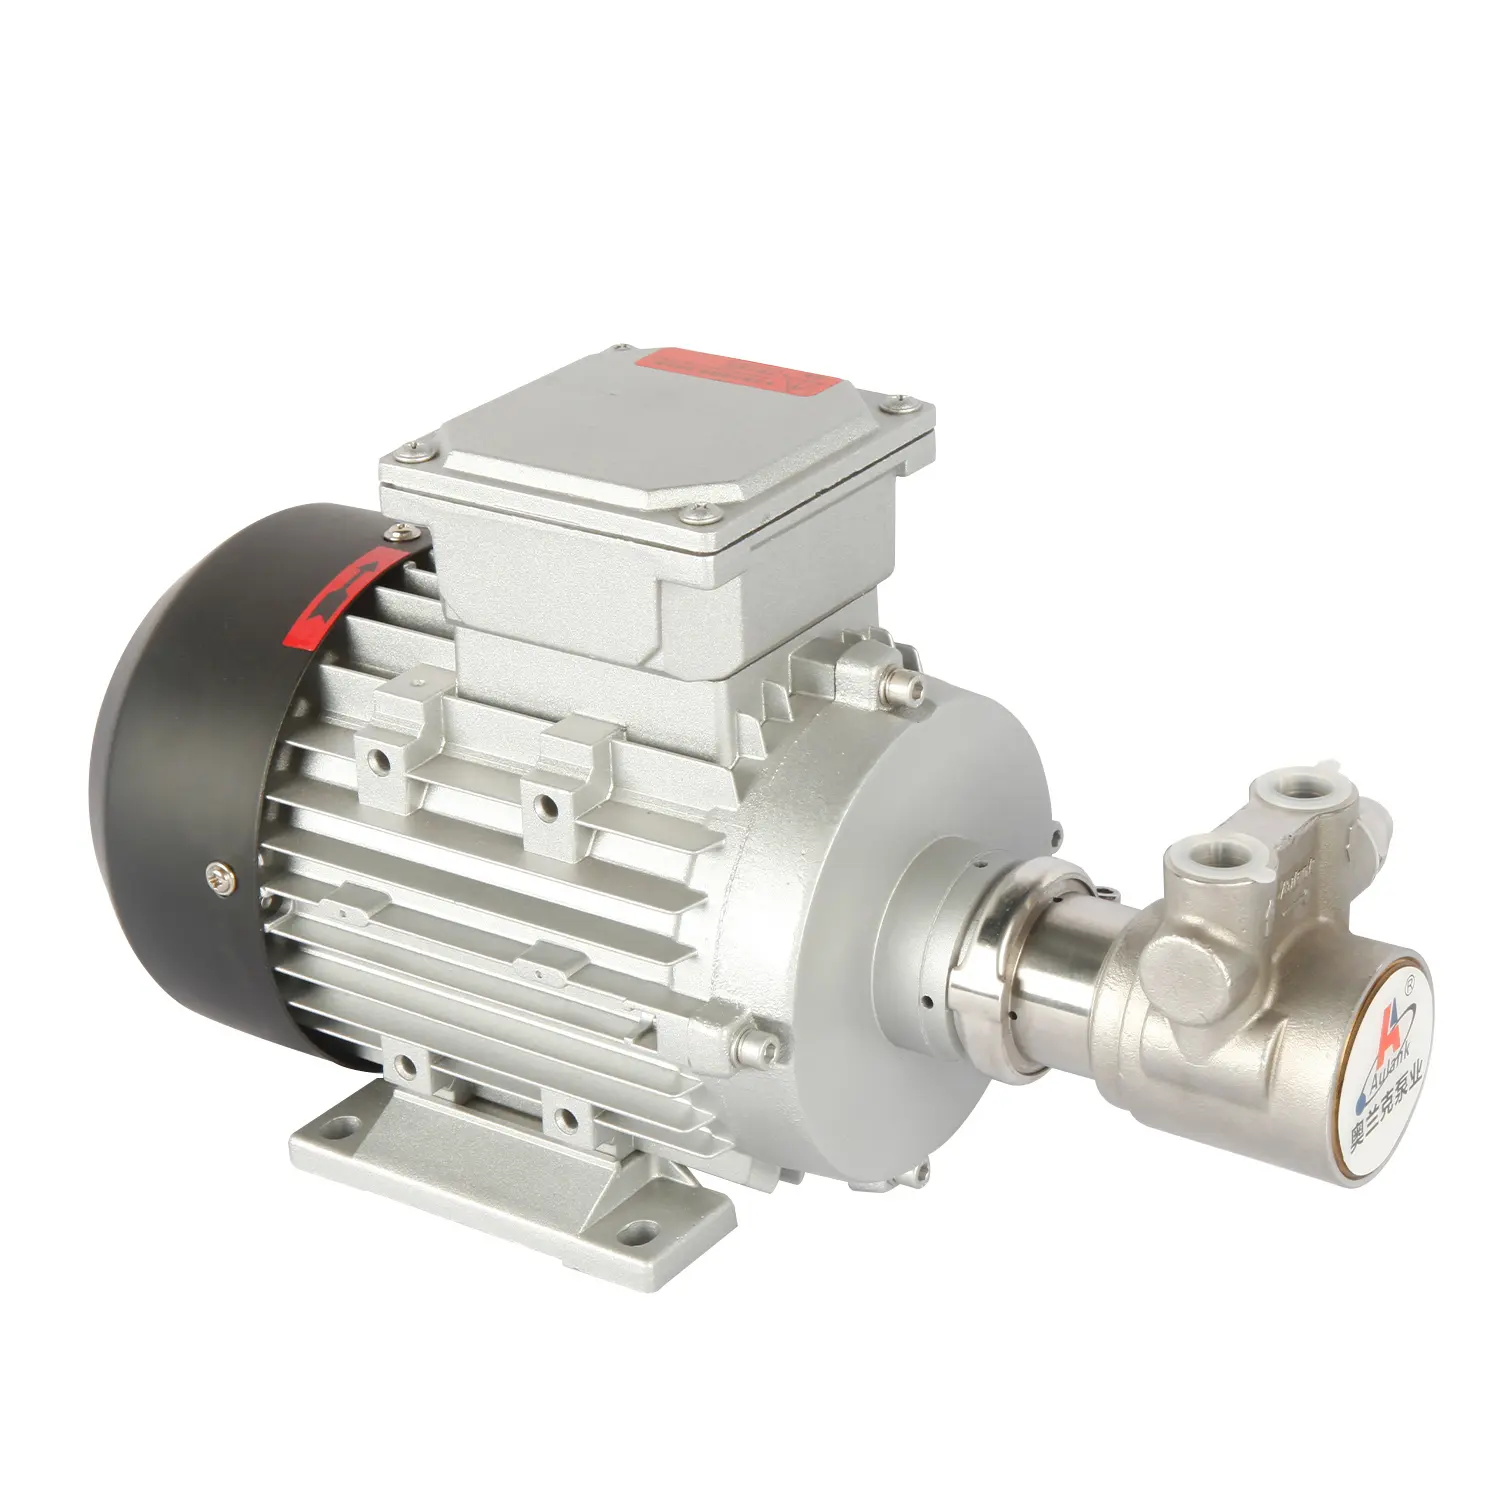 VP vane three phase pump with small size